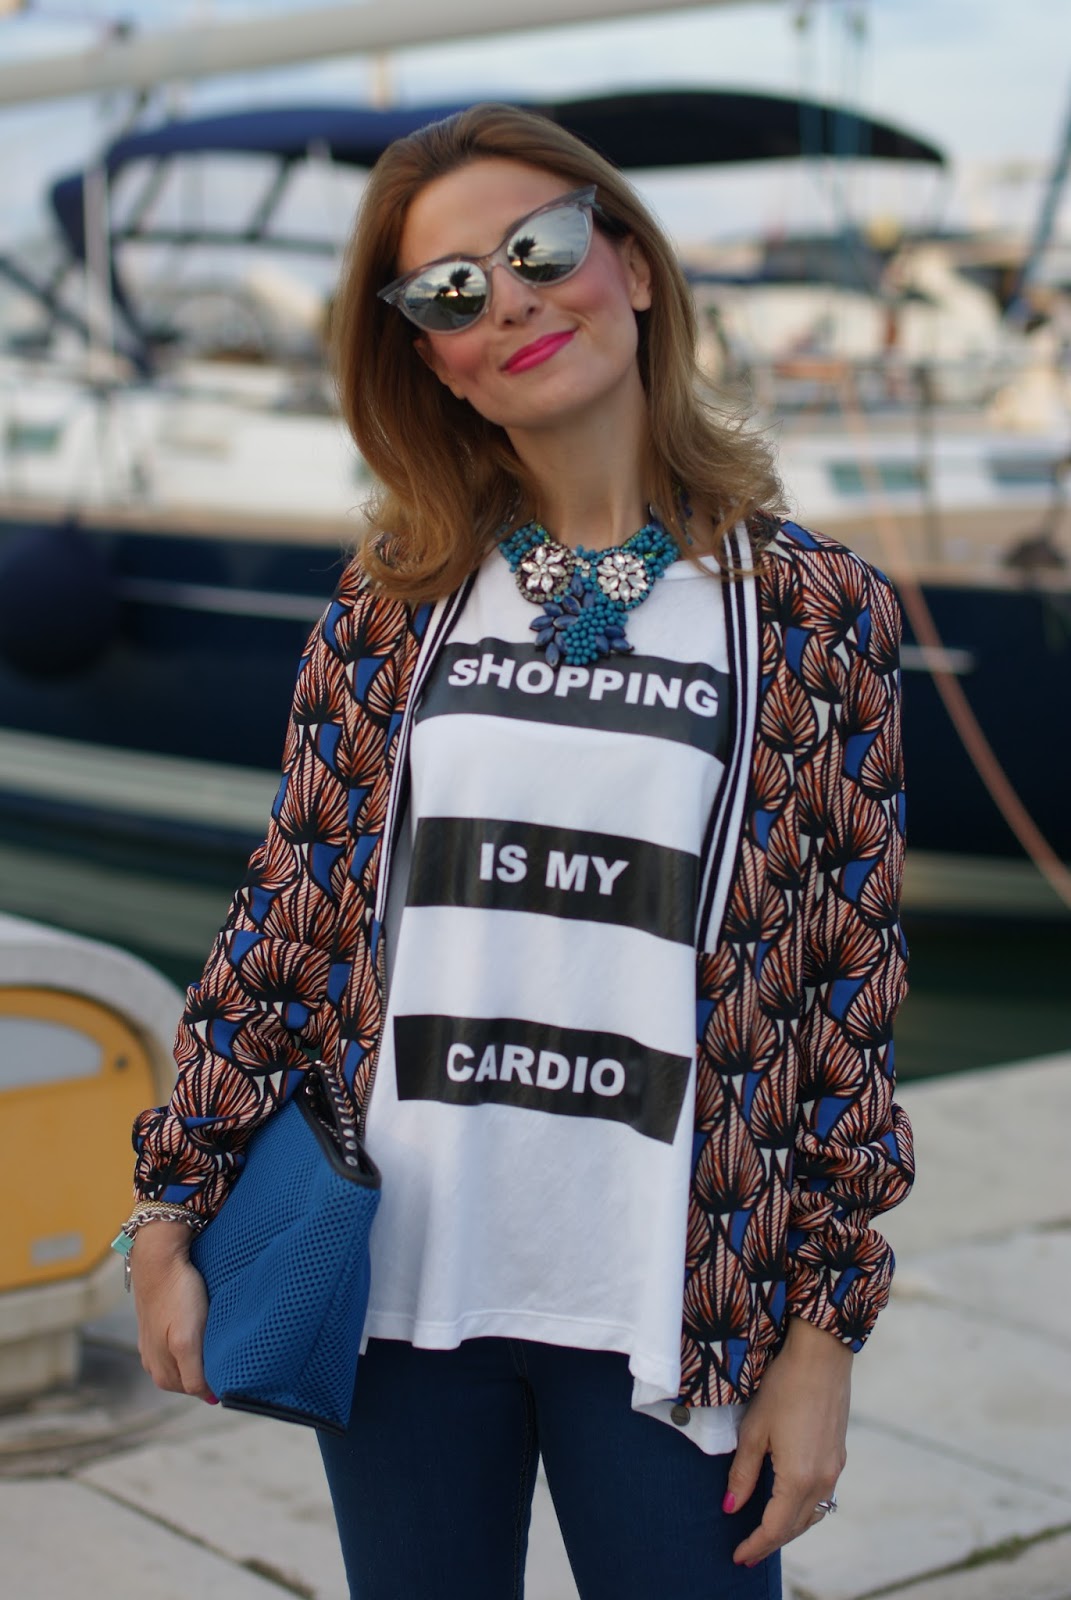 Shopping is my cardio t-shirt and jeggings | Fashion and Cookies ...